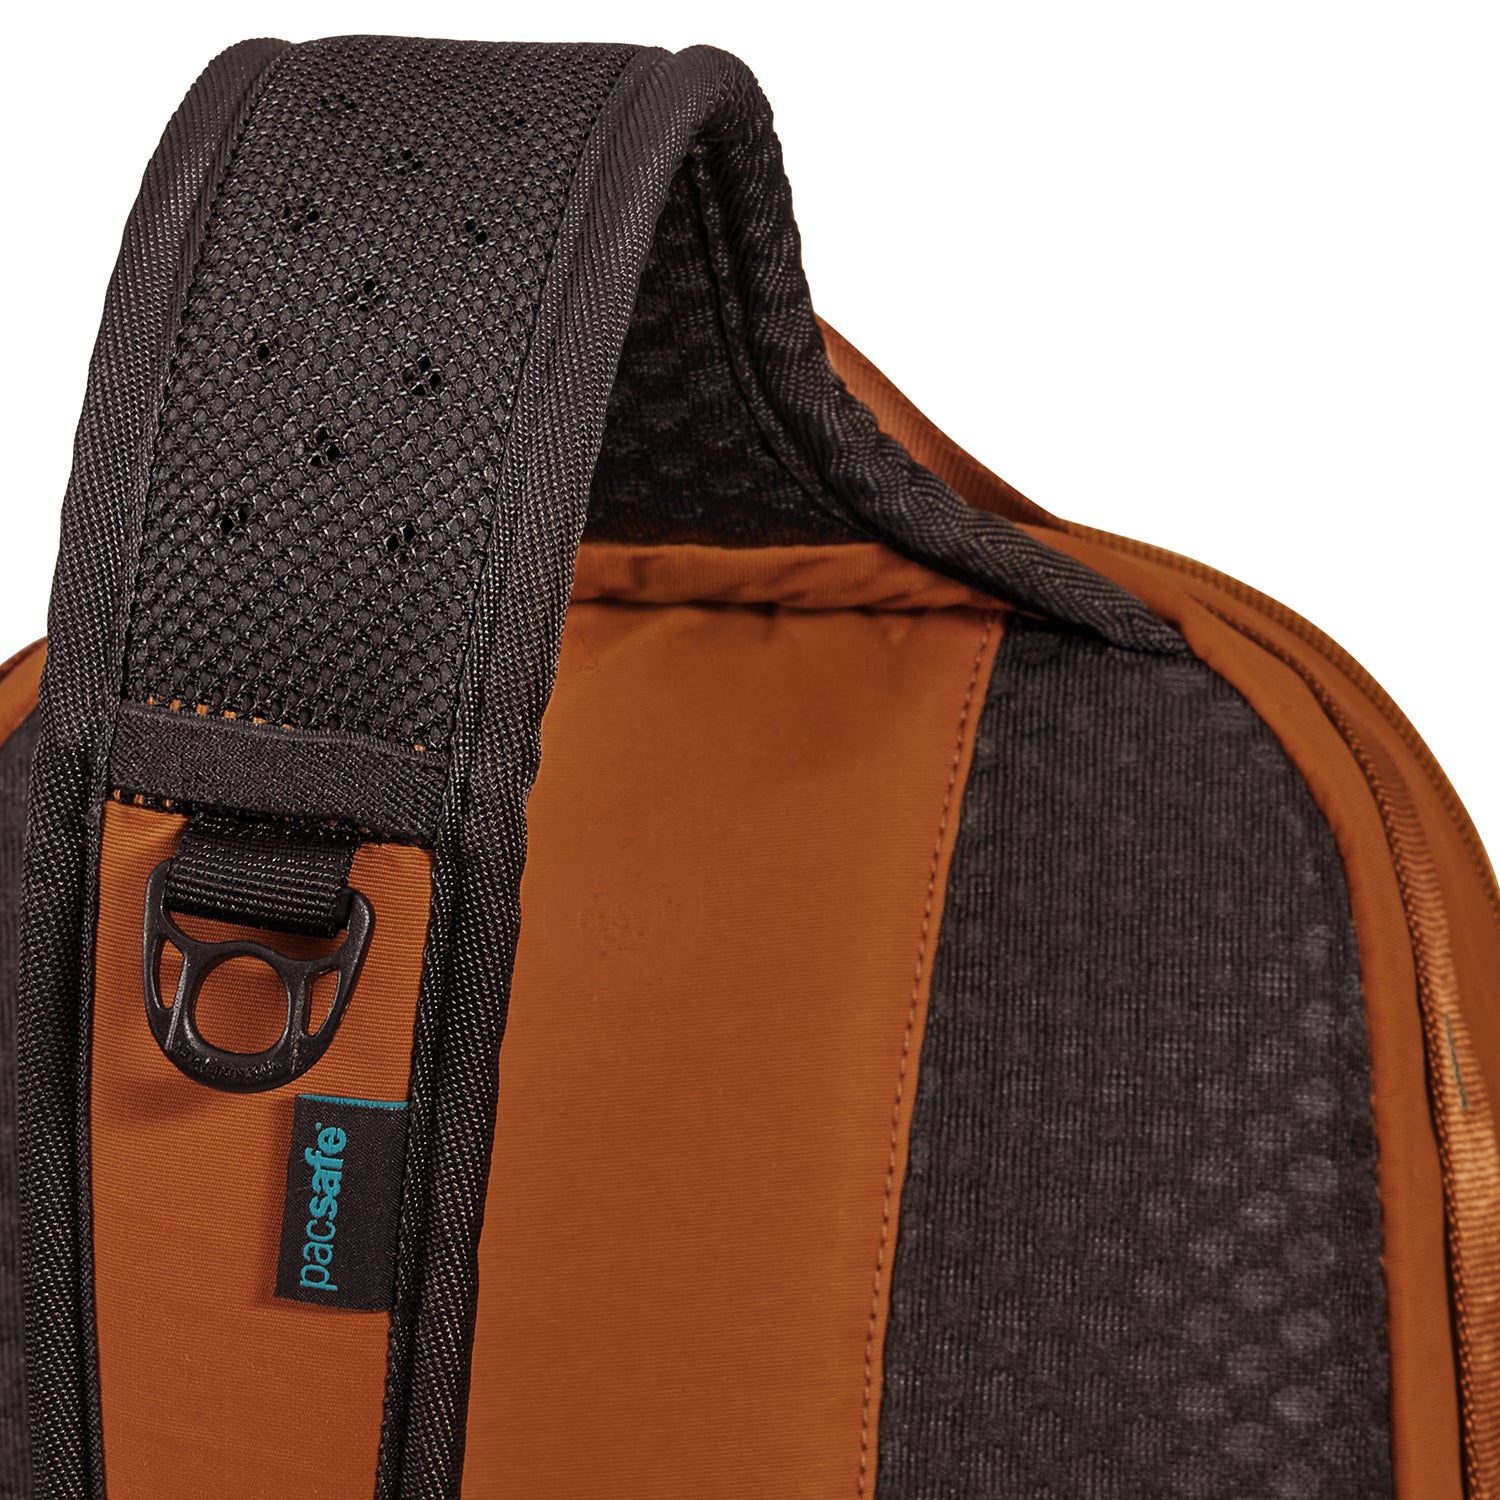 Pacsafe Eco 12L Anti-Theft Sling Backpack